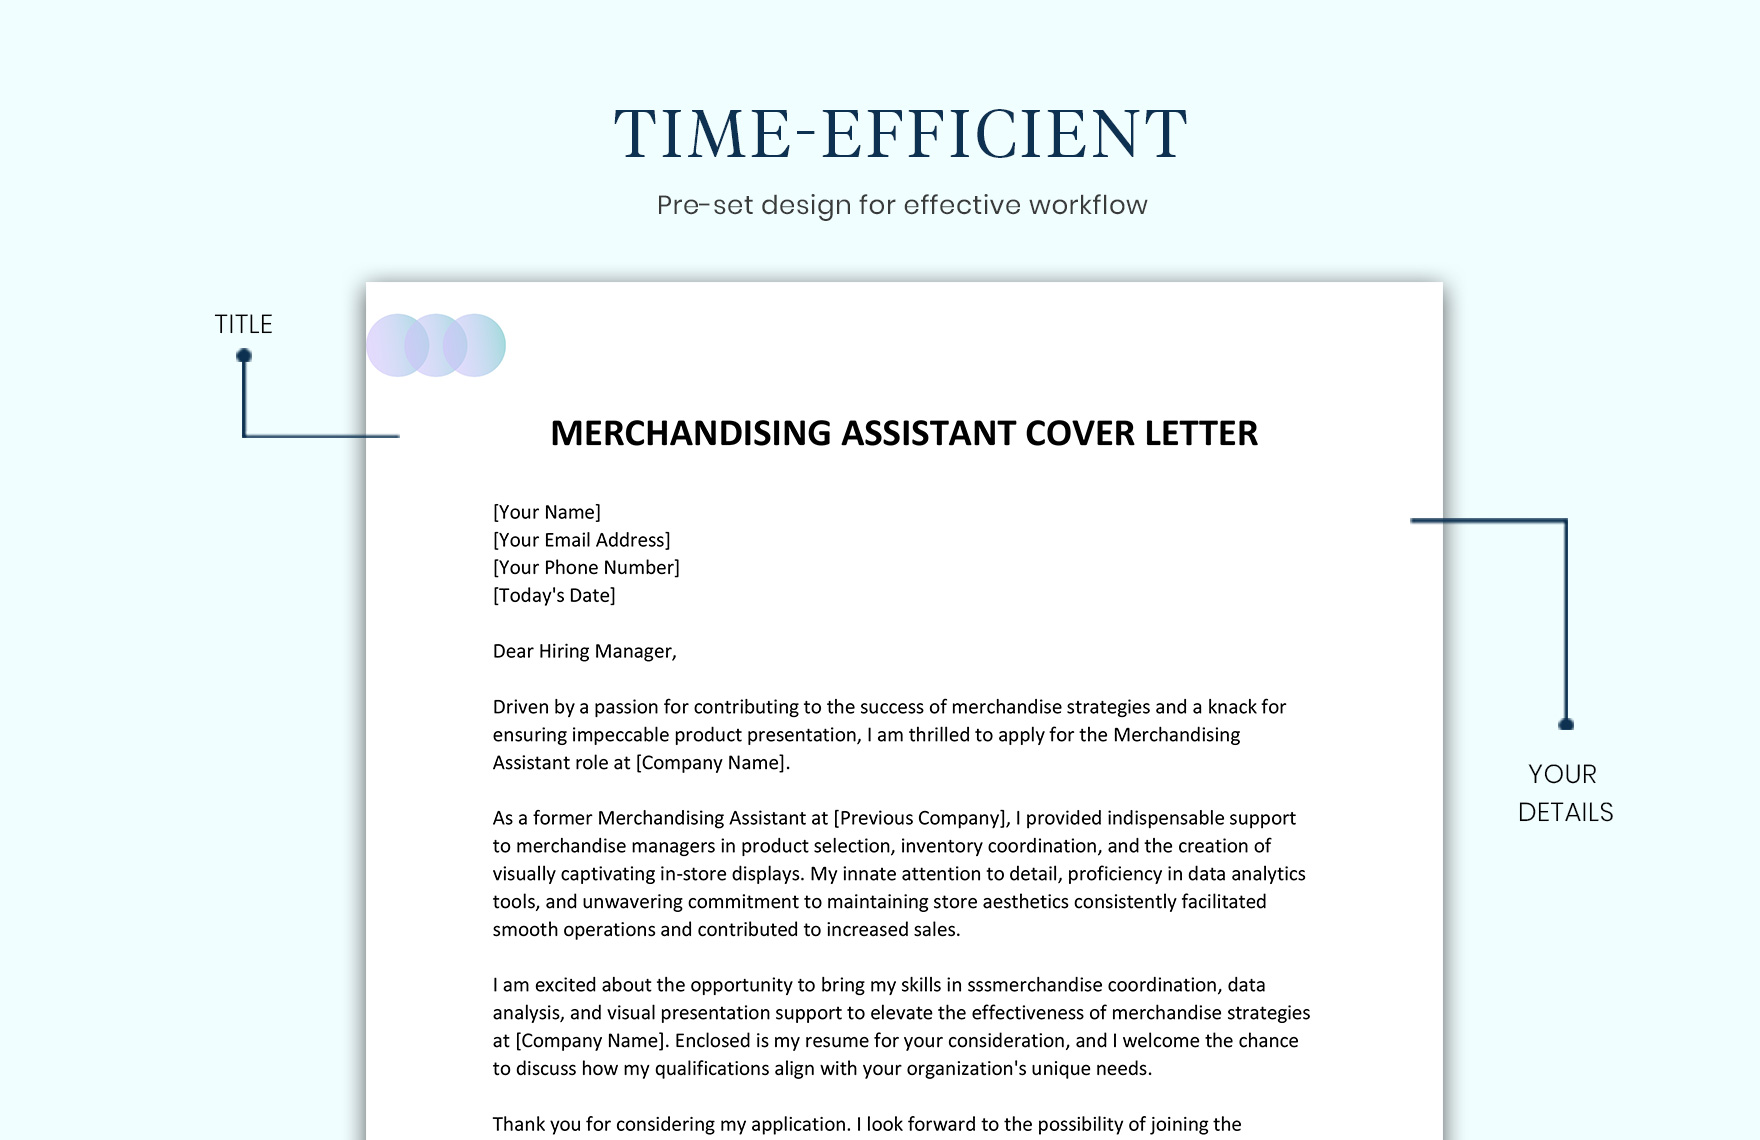 Merchandising Assistant Cover Letter